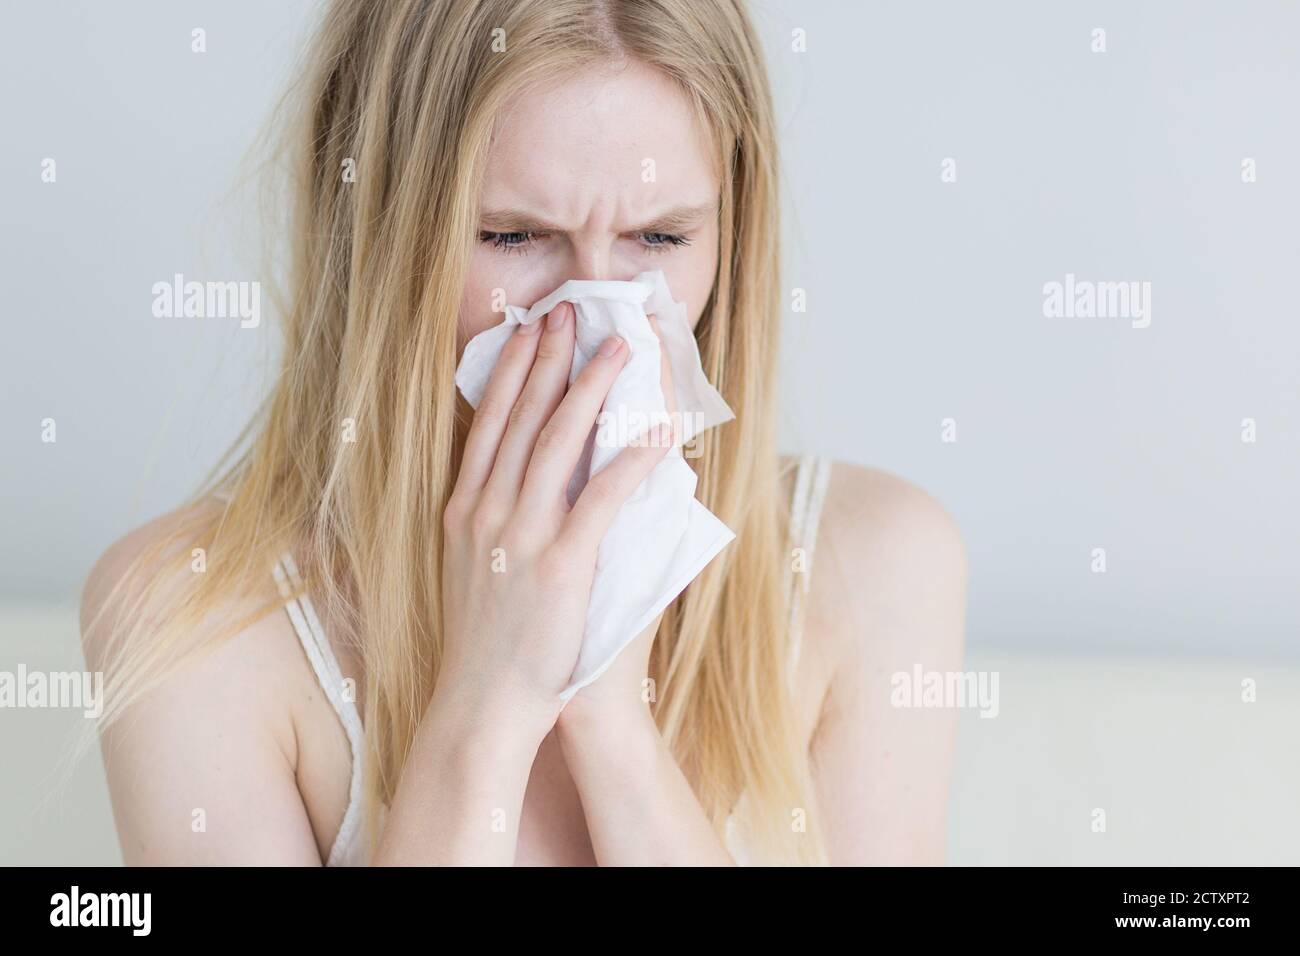 Sick young woman with a cold blowing her nose into a tissue paper at home. Close-up. Stock Photo